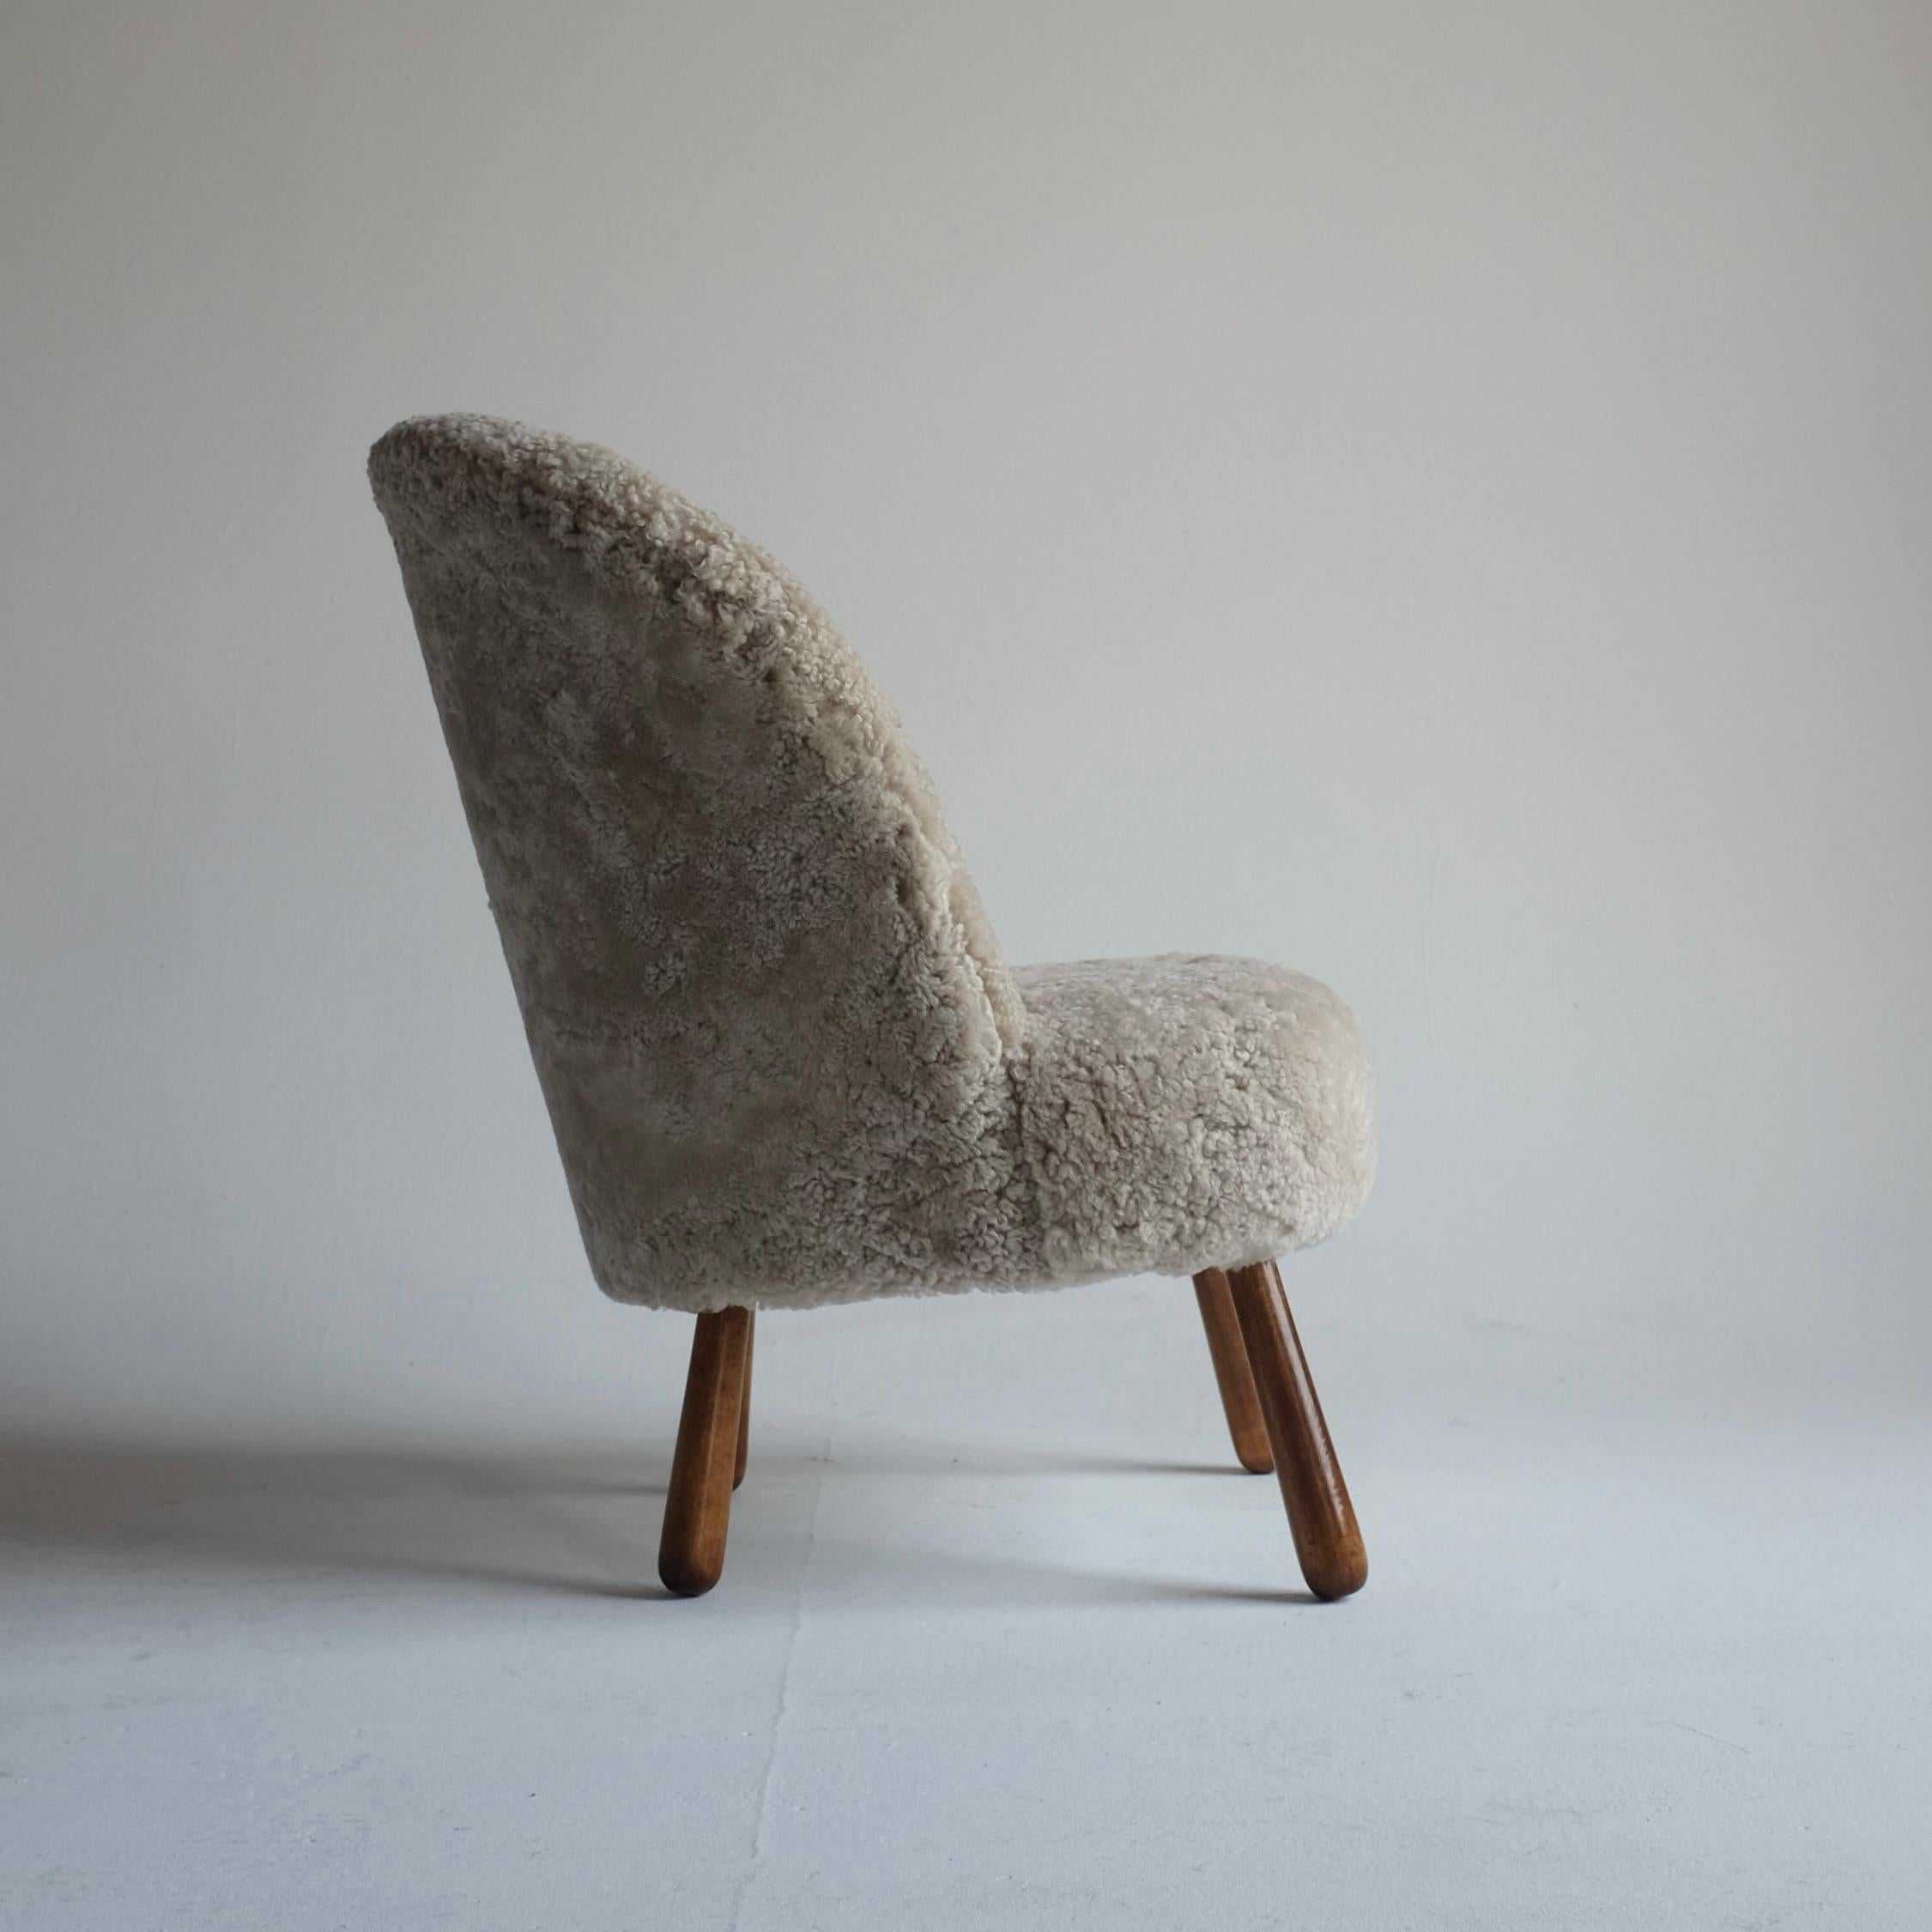 A Swedish Modern Side Chair newly upholstered in high-quality Sheepskin by Scandilock. This chair is most likely form the 1940s by an unknown designer and in the style of the famous Clam chair by Arnold Madsen with its rounded leg